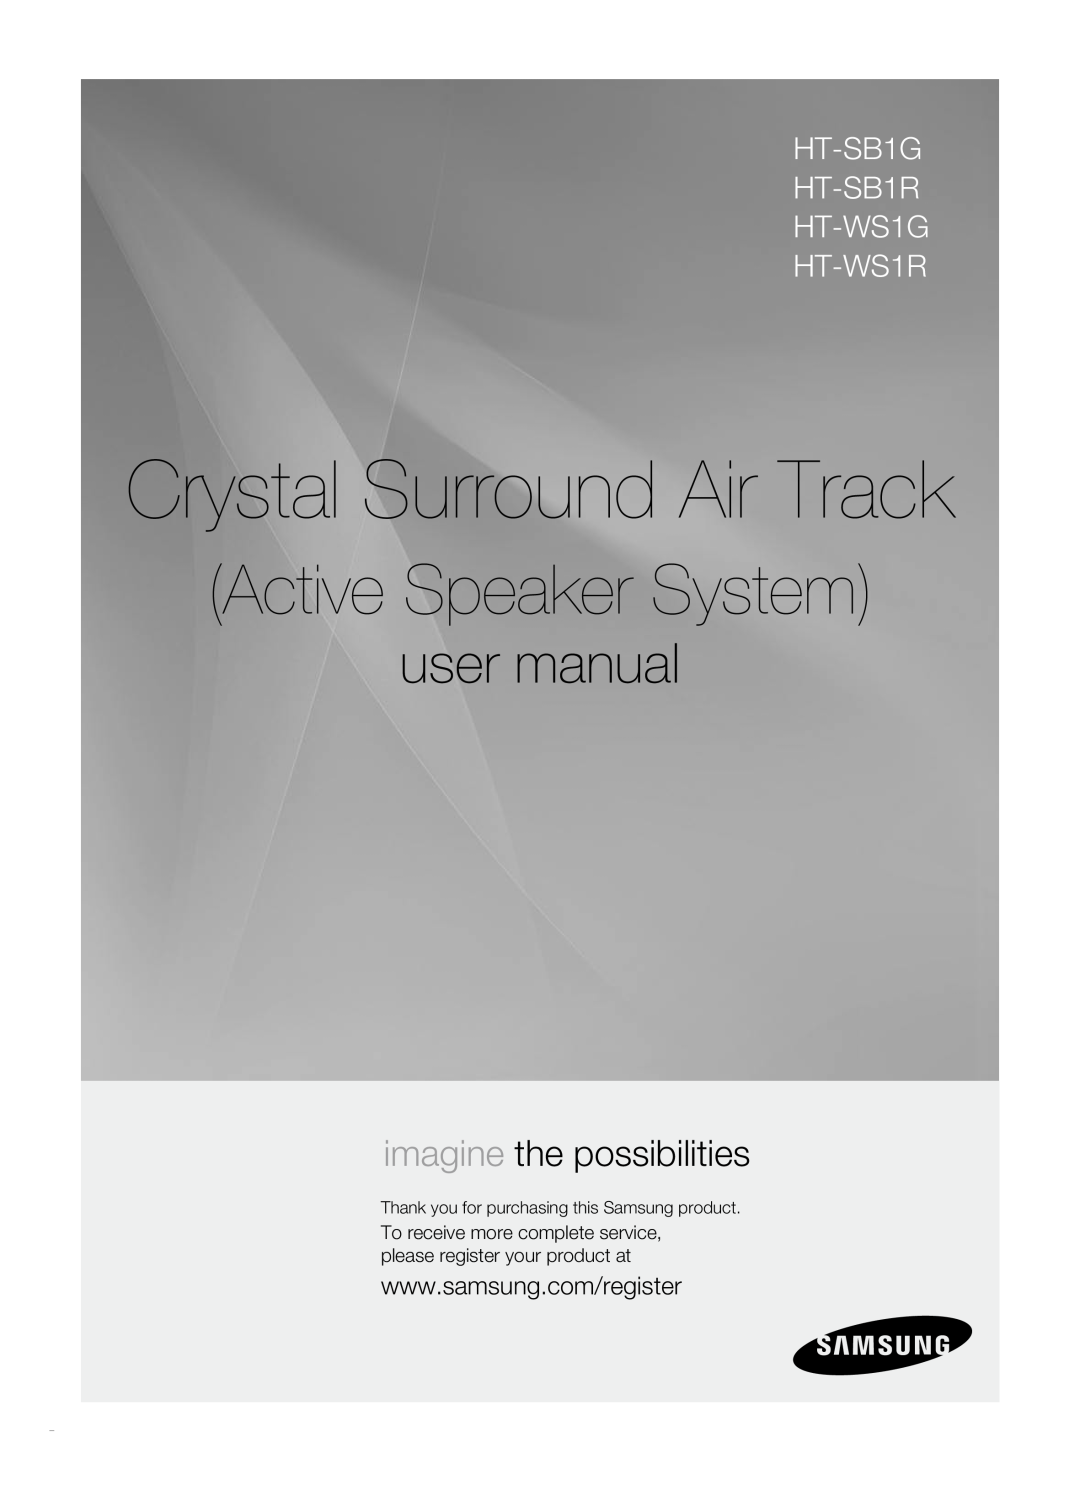 Samsung HT-SB1R, HT-WS1R, HT-SB1G user manual Crystal Surround Air Track, Active Speaker System, imagine the possibilities 